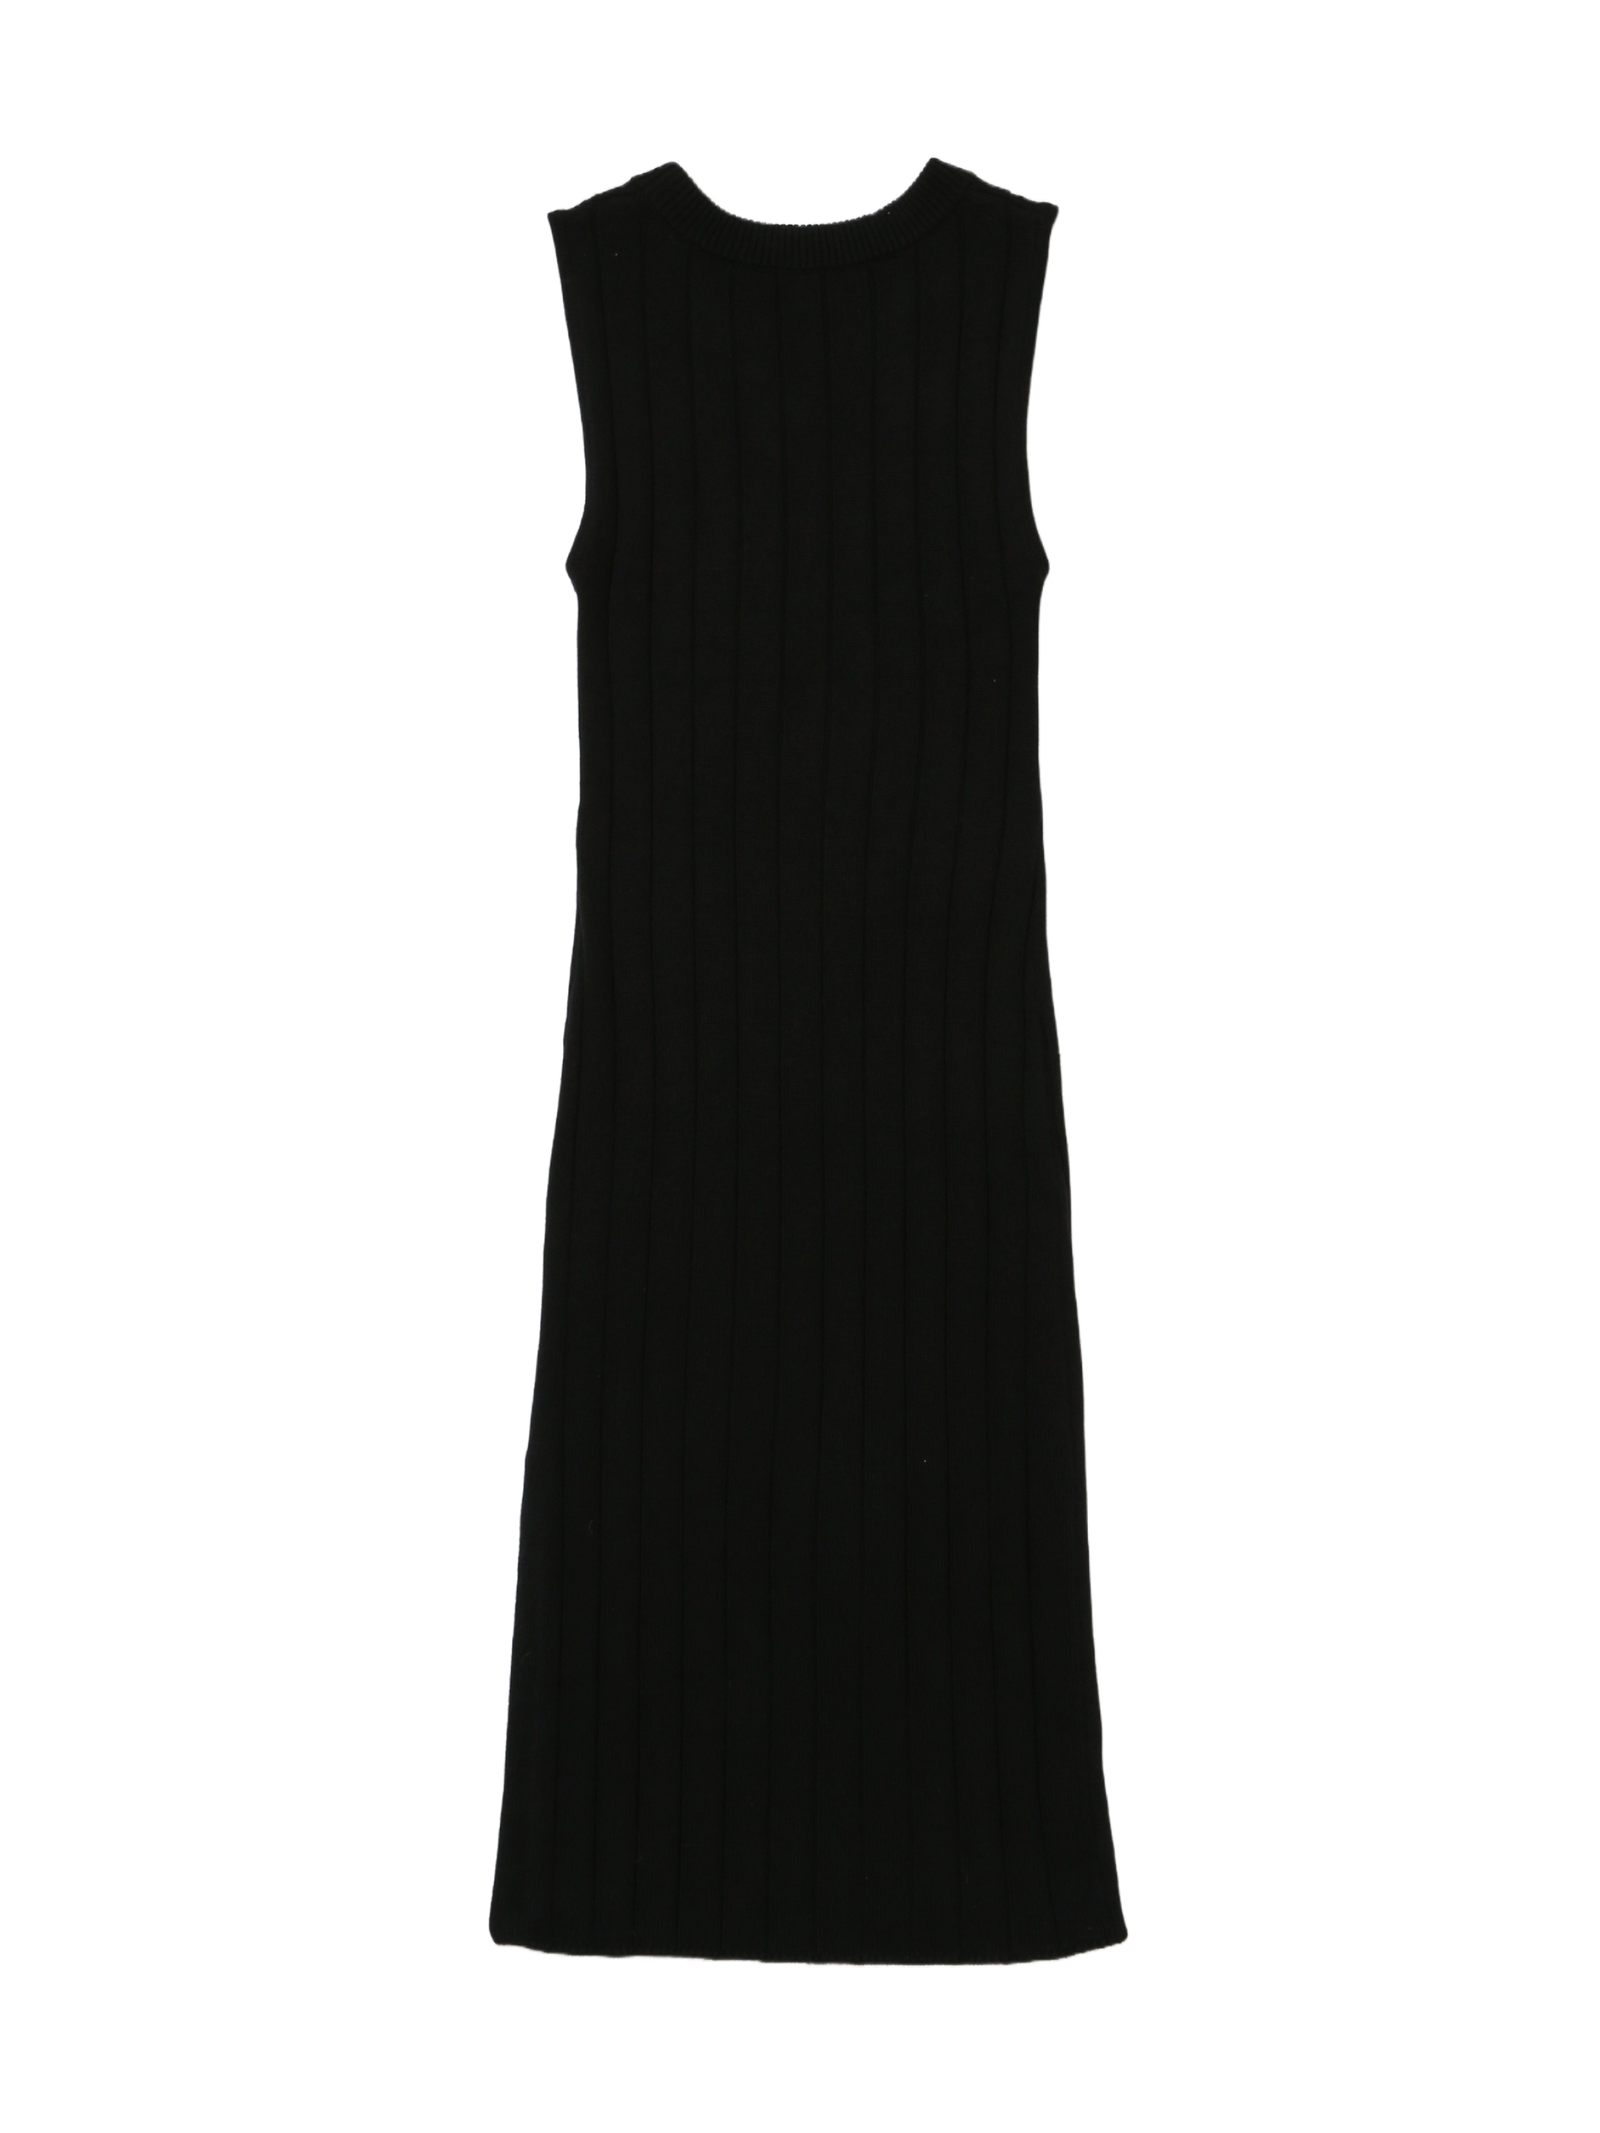 The Clemence Dress